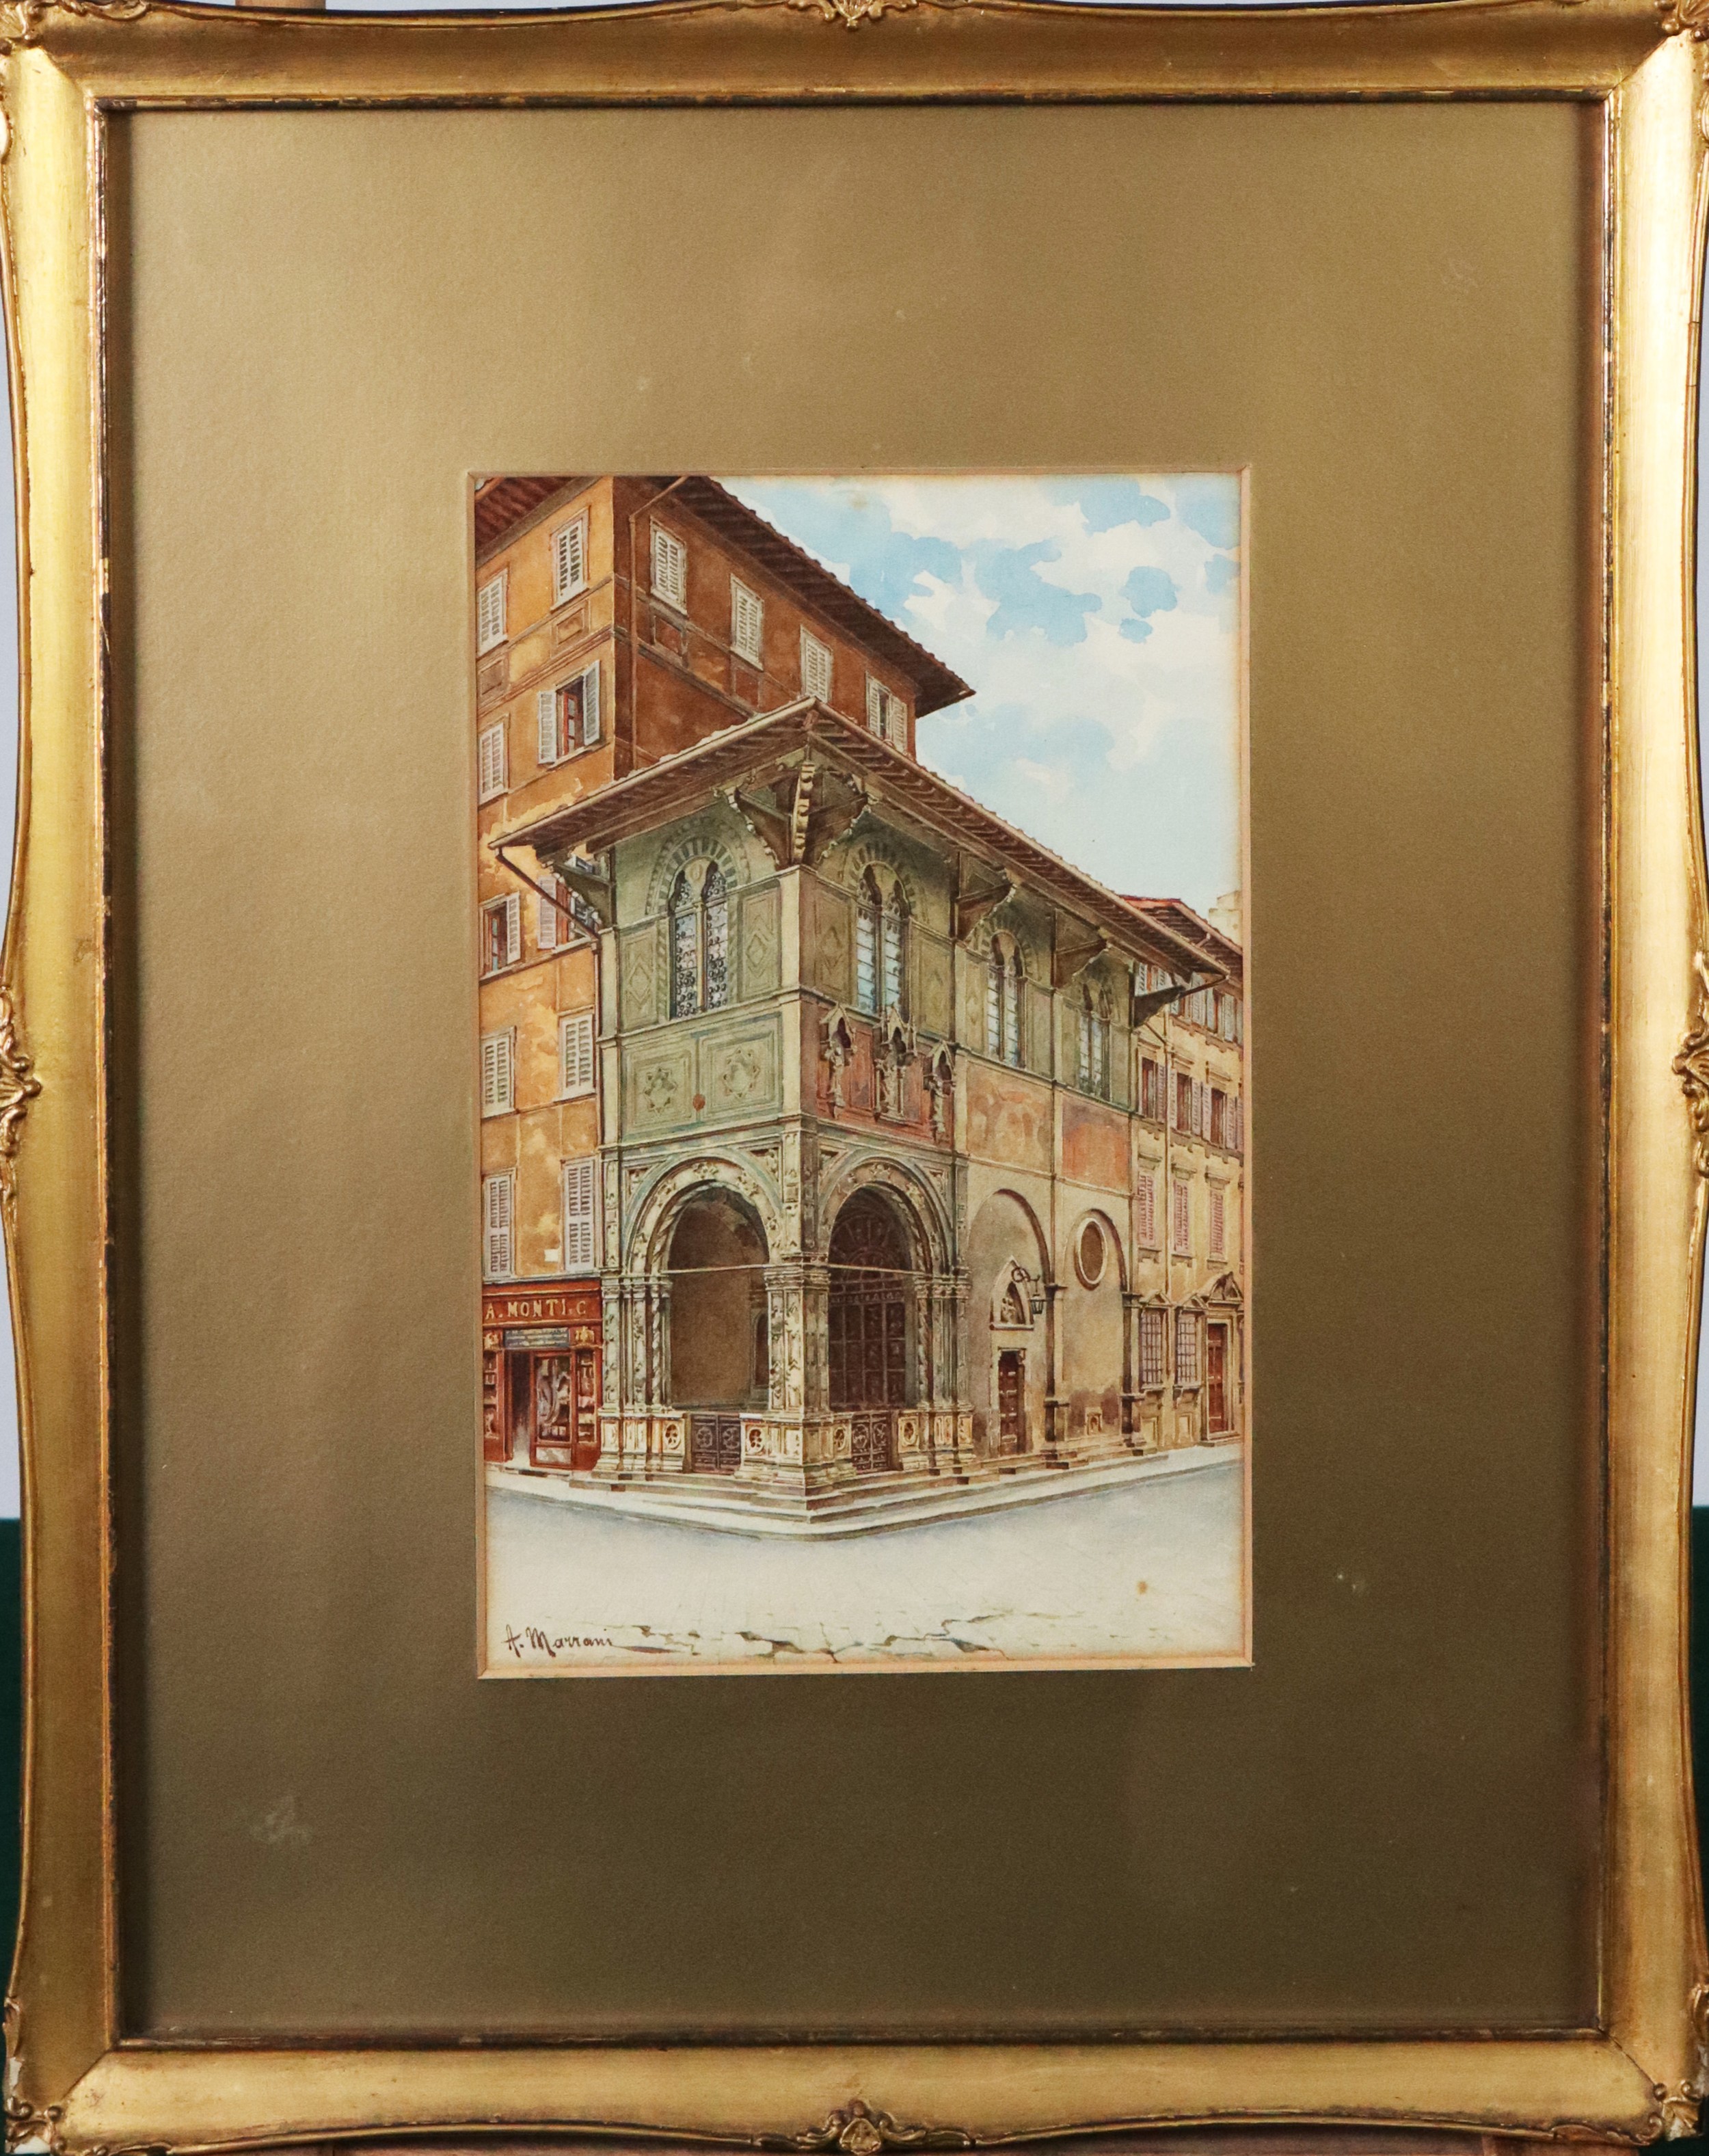 A MARRANI (Florence, Nineteenth Century) WATERCOLOUR Highly detailed Florentine building facade - Image 2 of 2